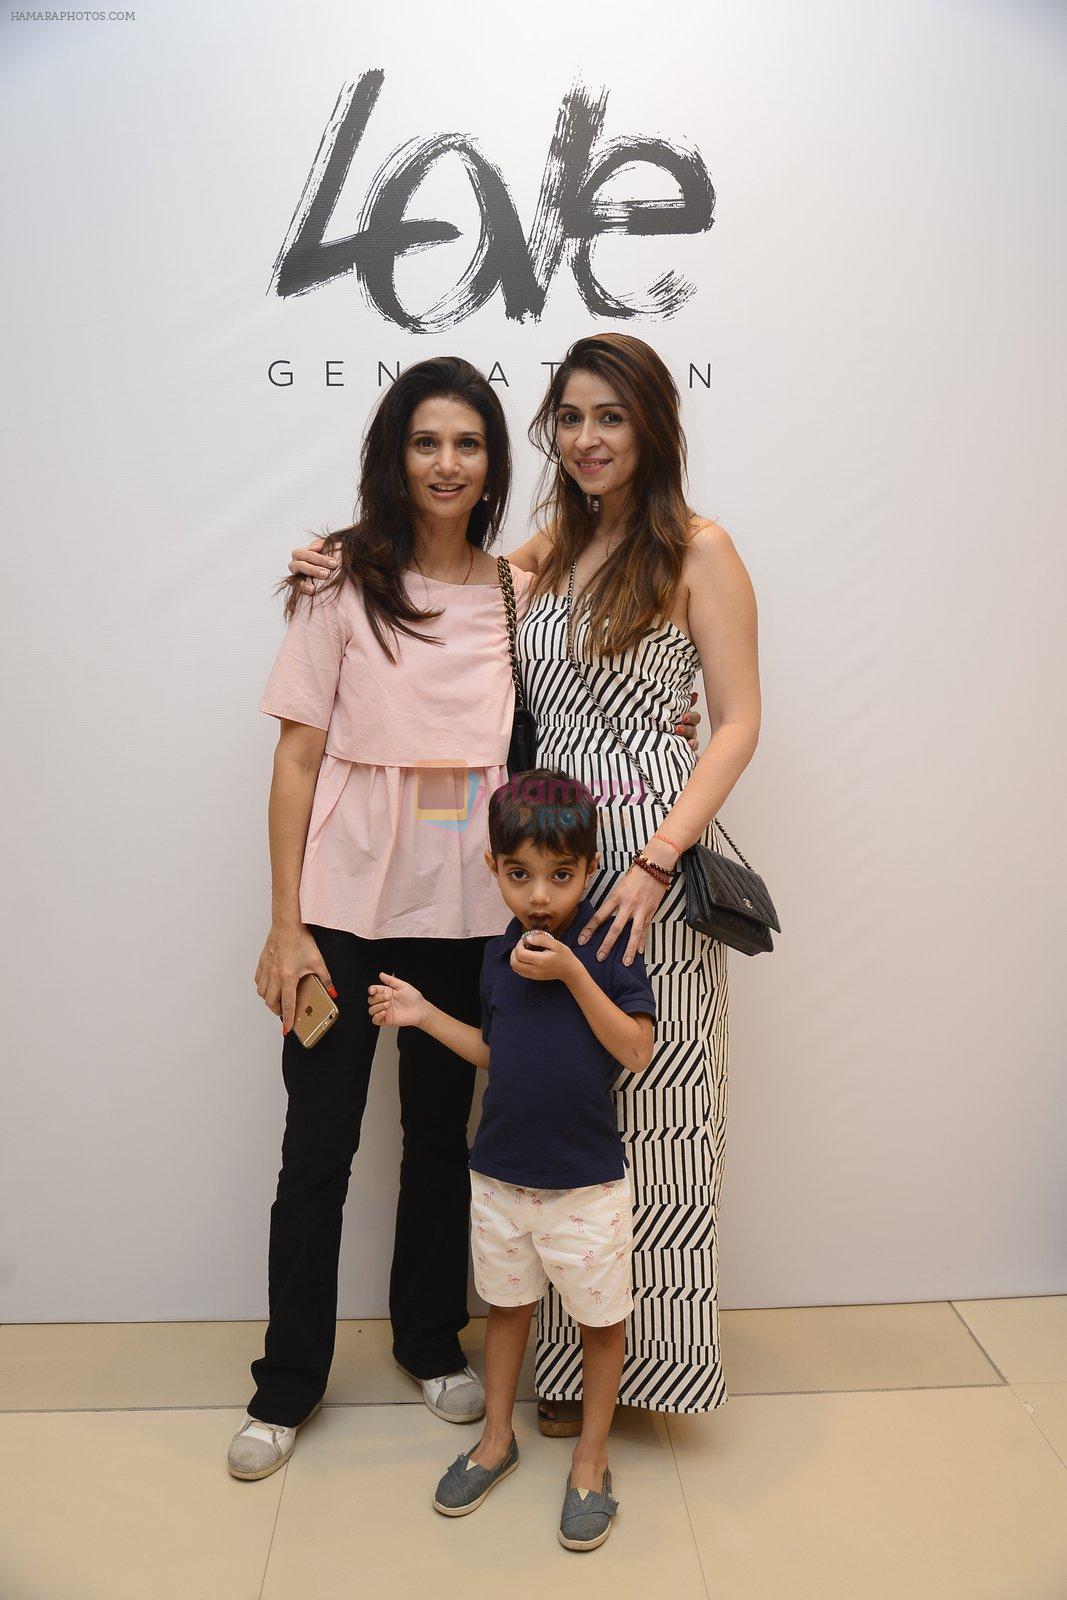 Rhea Pillai at Love Generation launch at Shoppers Stop on 7th Oct 2016